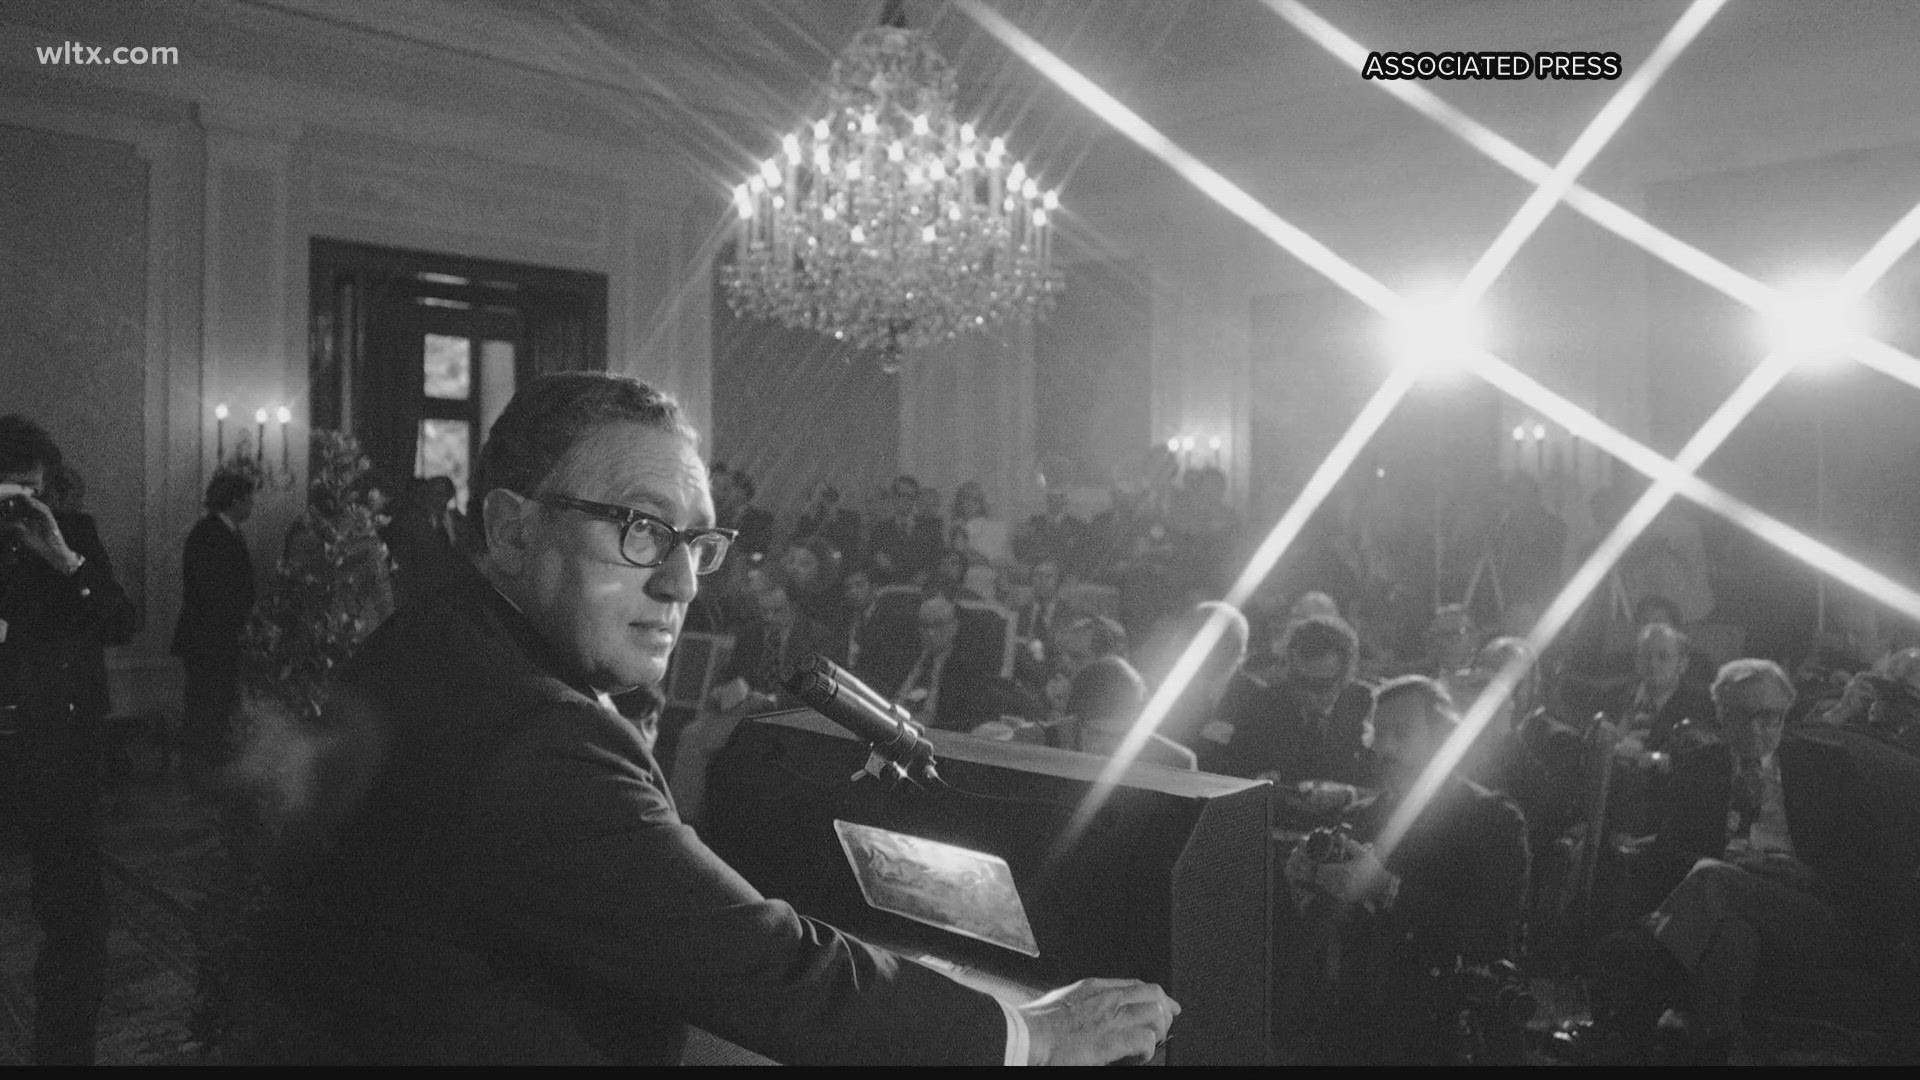 Kissinger served as National Security Adviser, Secretary of State for two presidents and won the Noble prize.